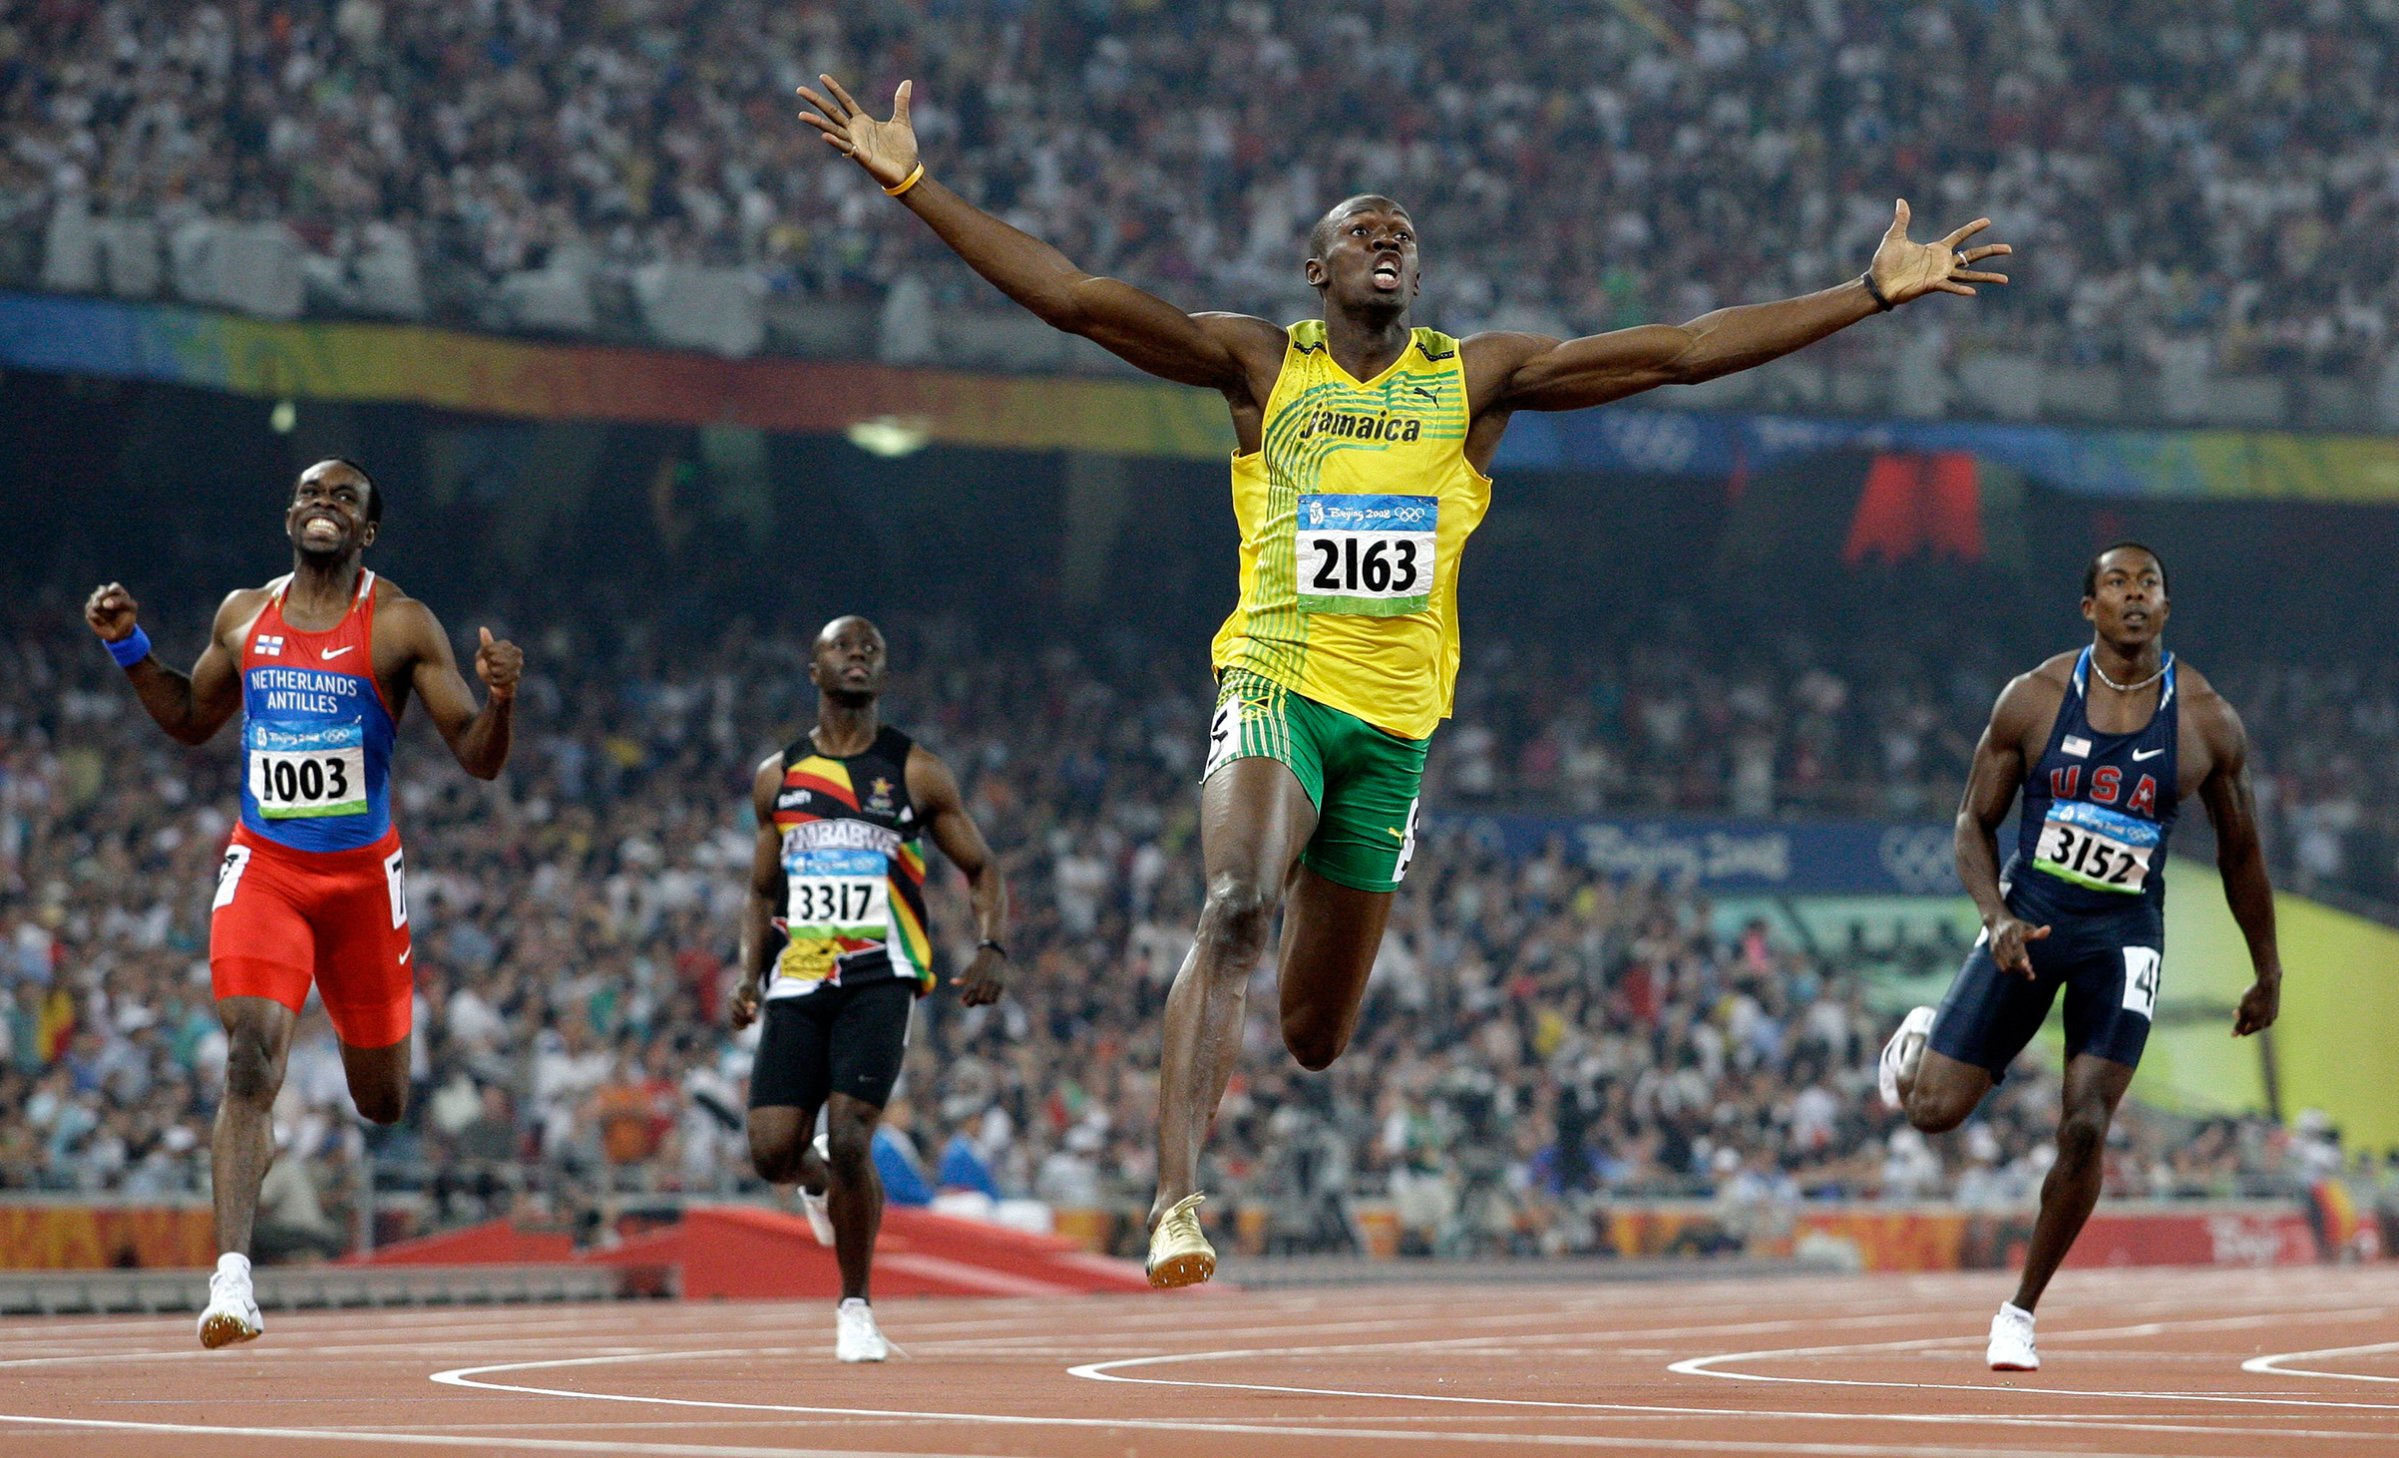 Jamaica's Usain Bolt crosses the finish line to win the gold in the men's 200-meter final during the athletics competitions in the National Stadium at the Beijing 2008 Olympics, Aug. 20, 2008.